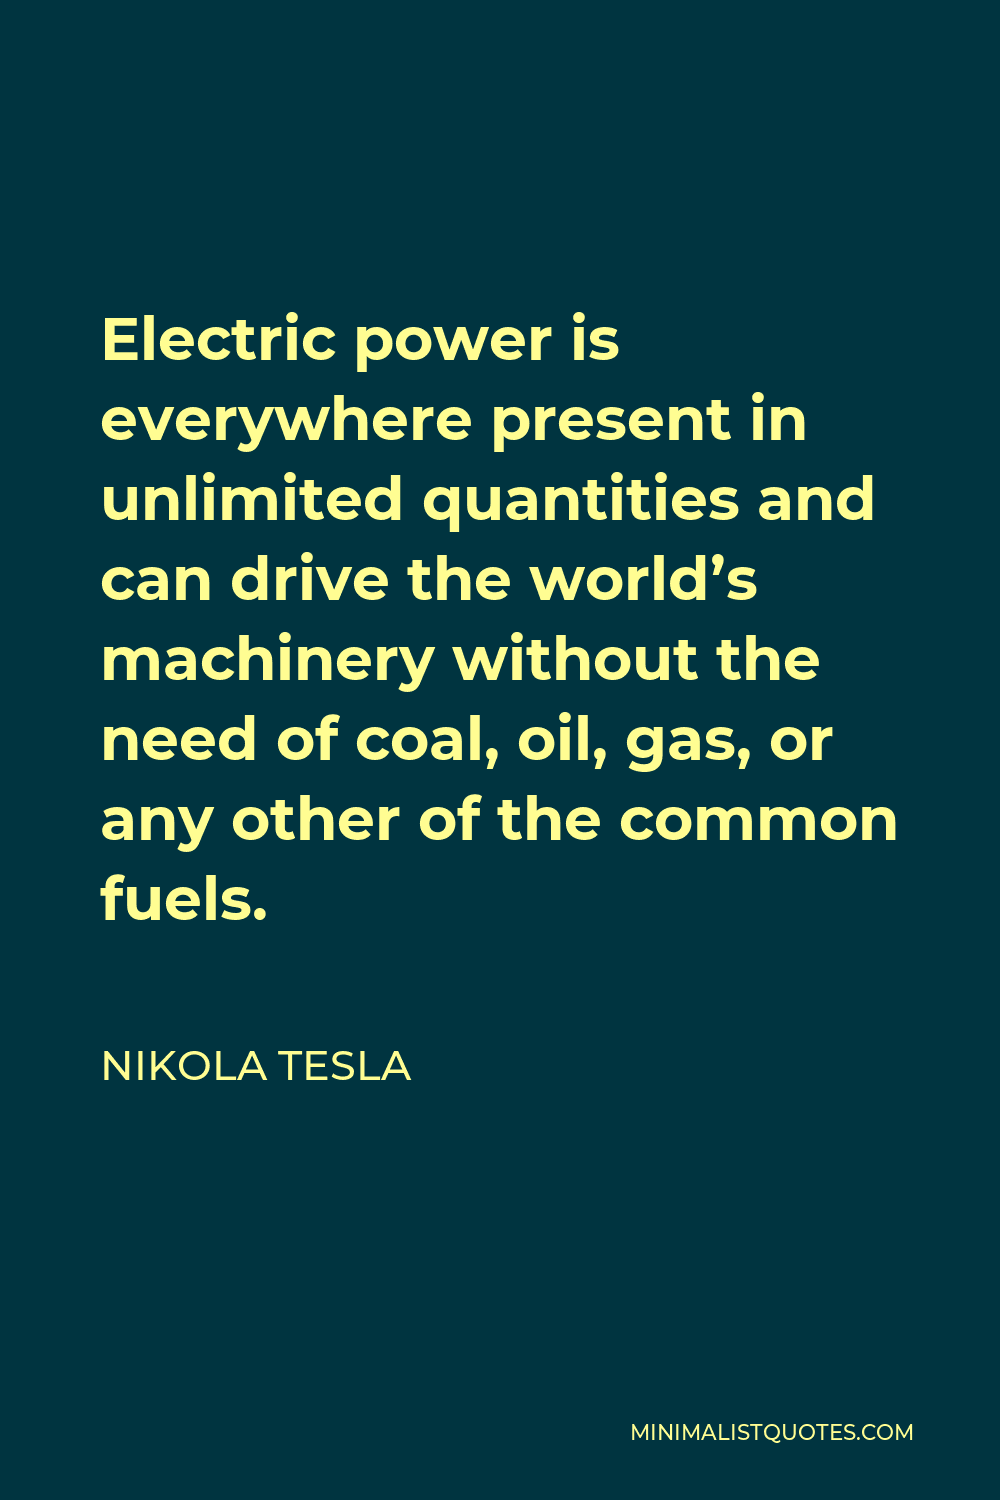 Nikola Tesla Quote - Electric power is everywhere present in unlimited quantities and can drive the world’s machinery without the need of coal, oil, gas, or any other of the common fuels.